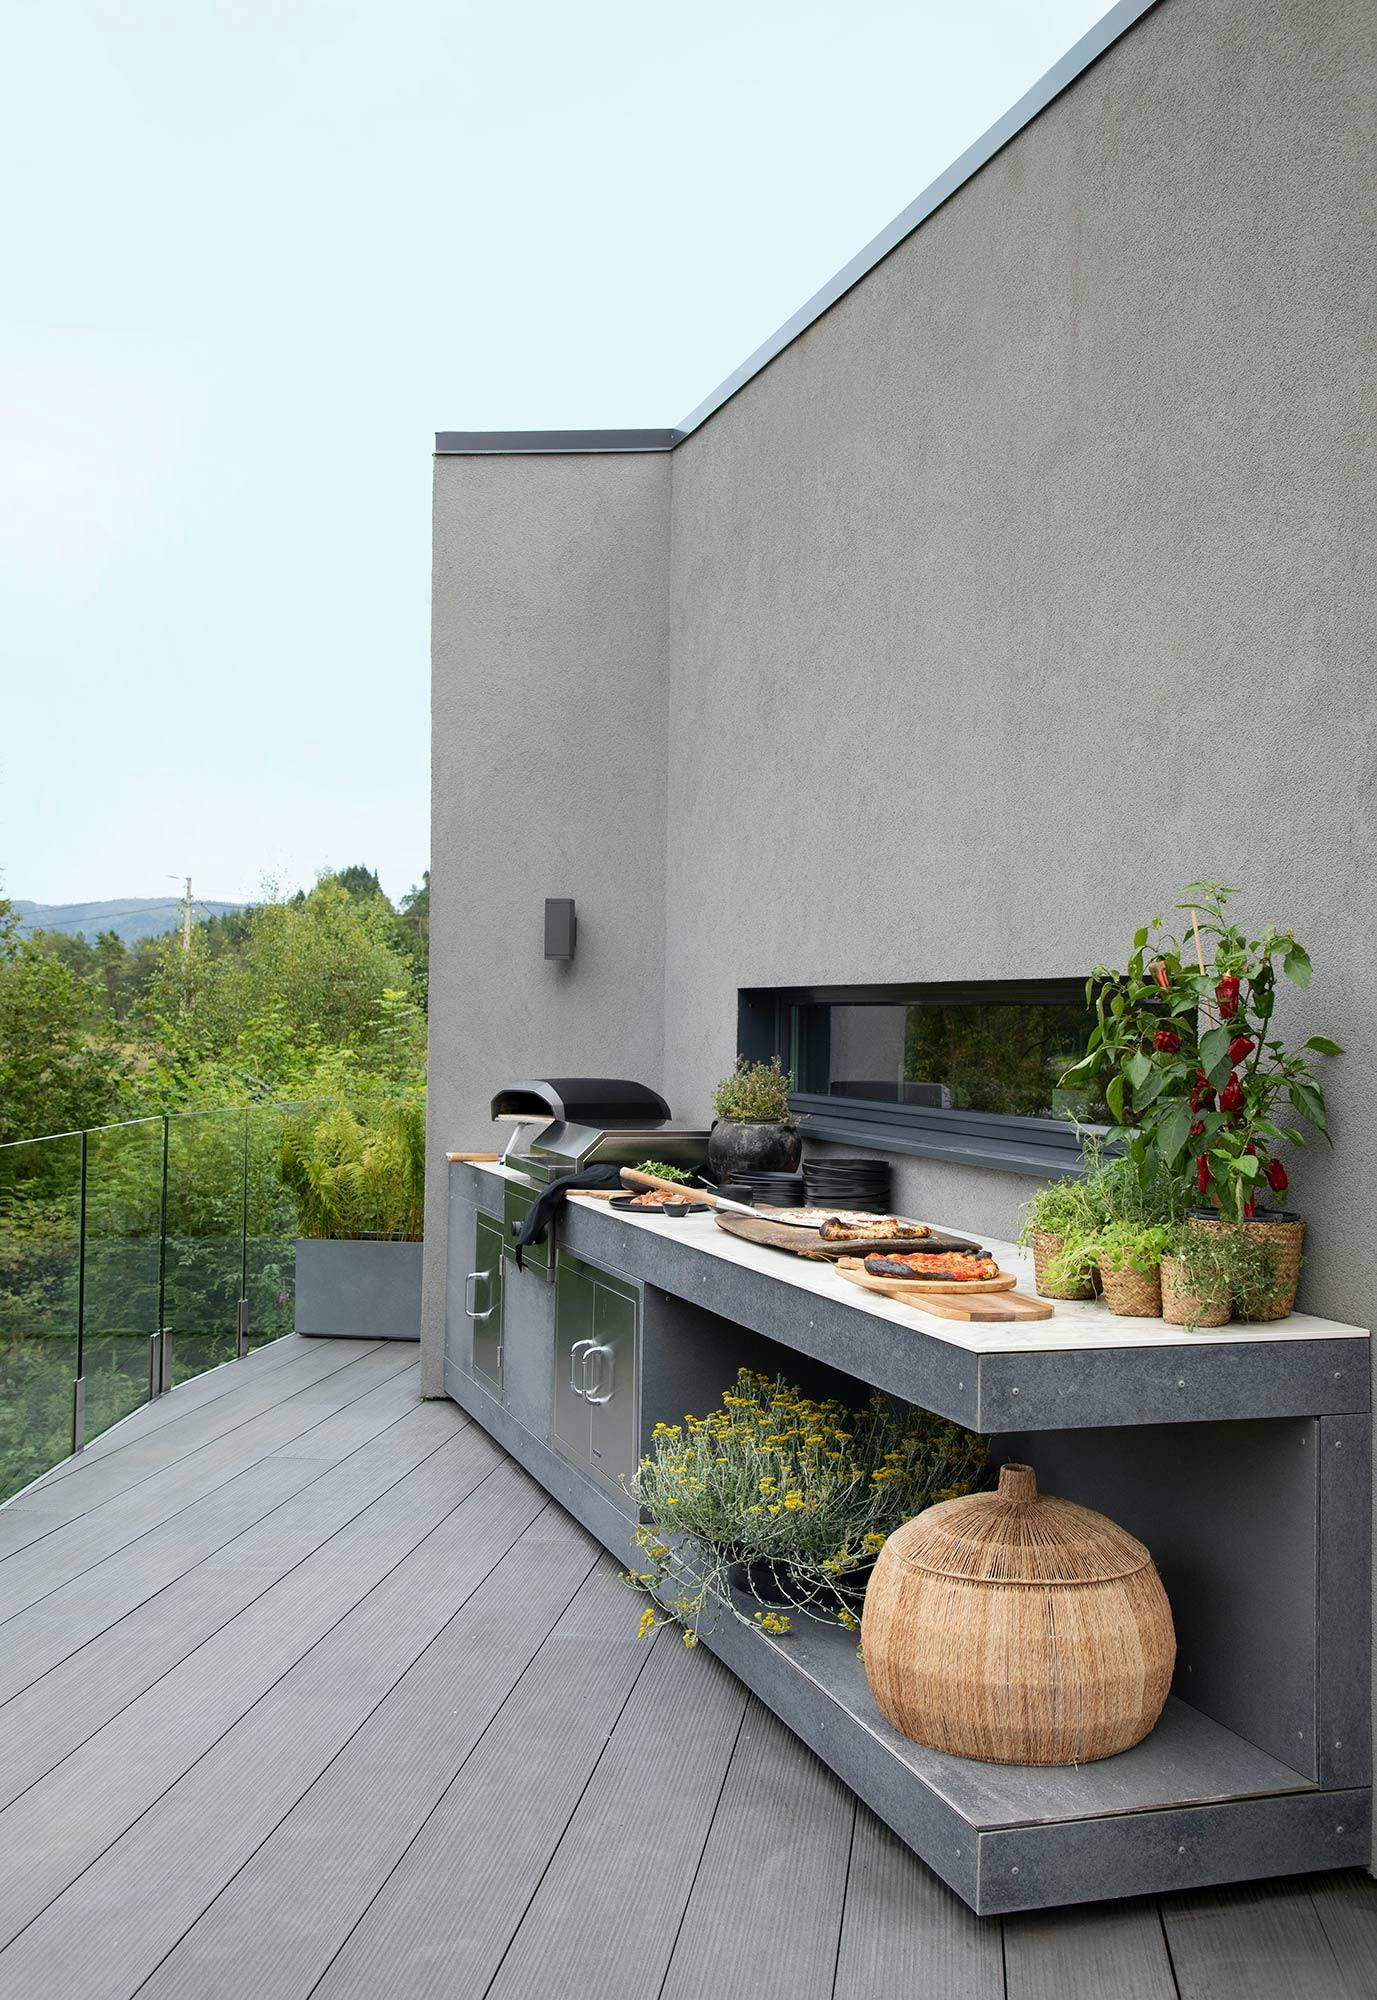 Numéro d'image 37 de la section actuelle de Cosentino and Ballingslöv AB in collaboration during Stockholm Design Week to launch a new outdoor kitchen de Cosentino France